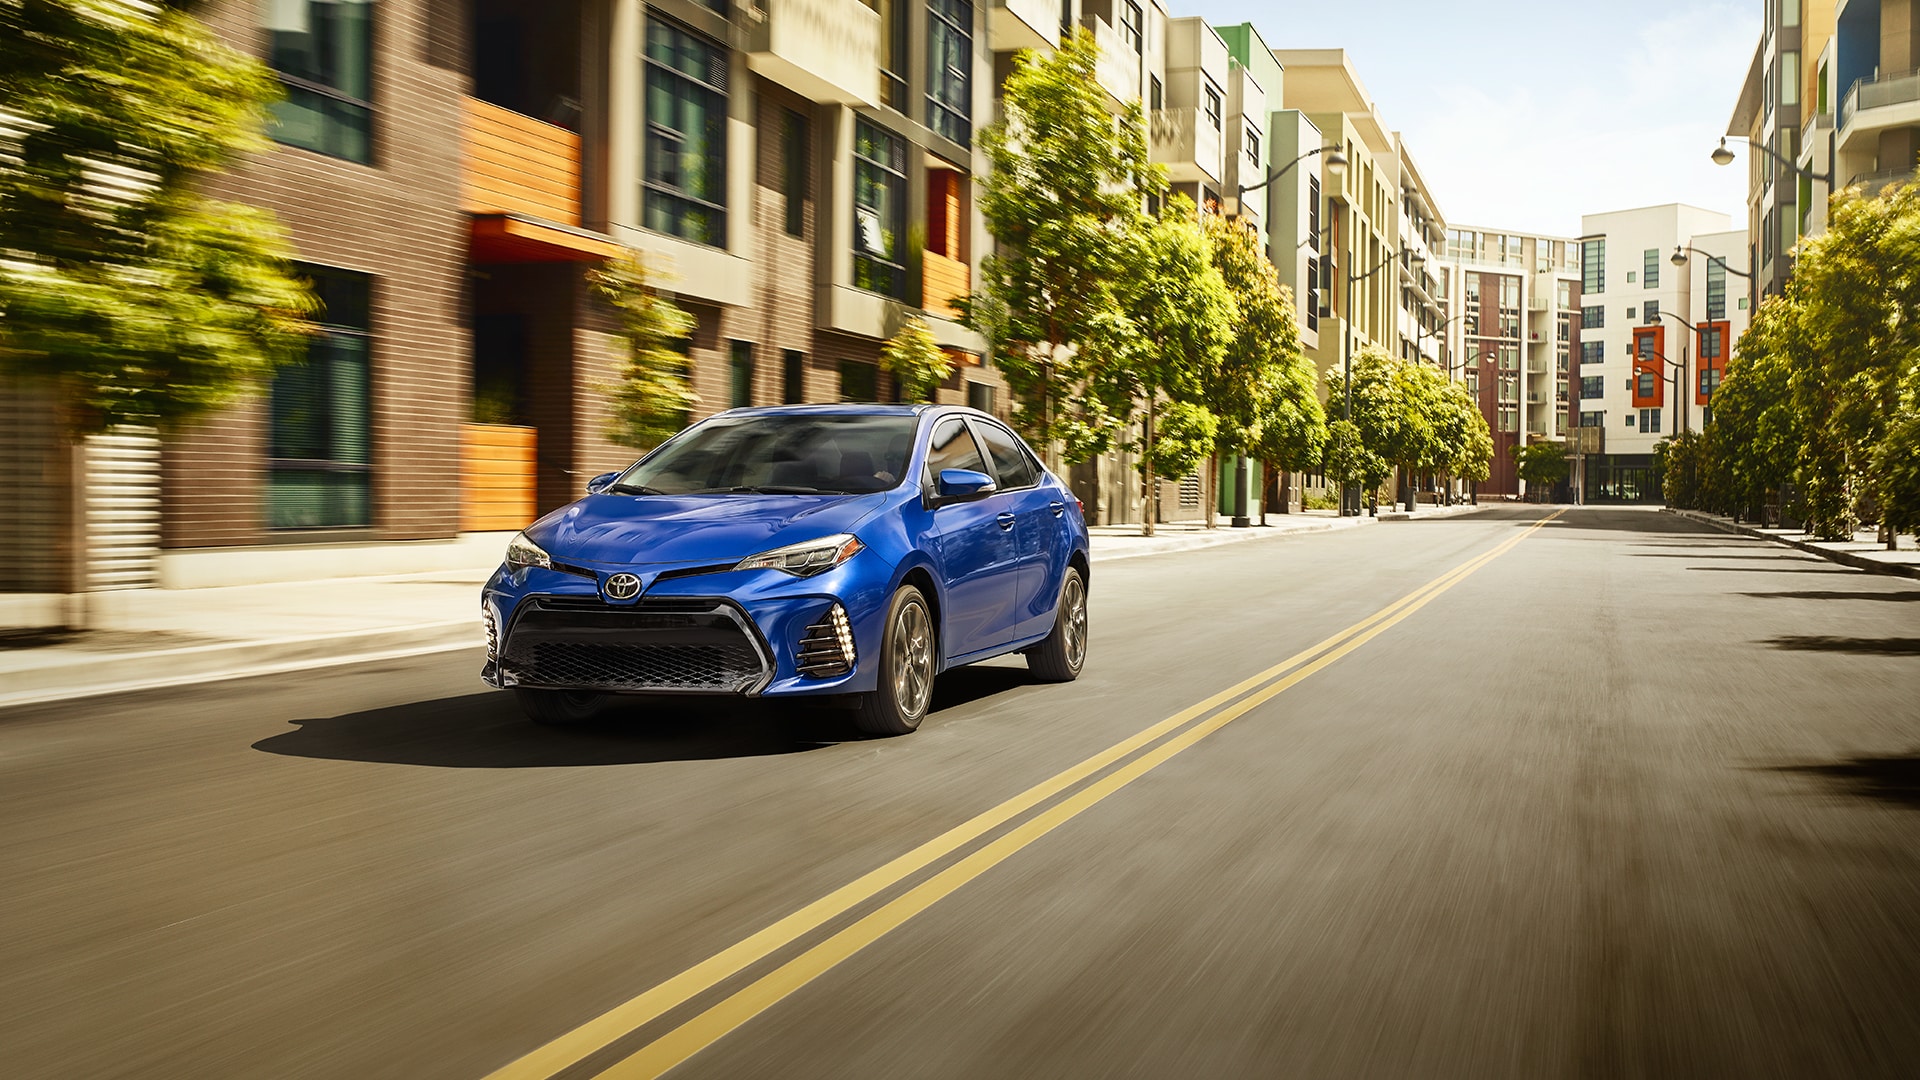 2019 Toyota Corolla blue color in city on road front side view 1080p uhd wallpaper